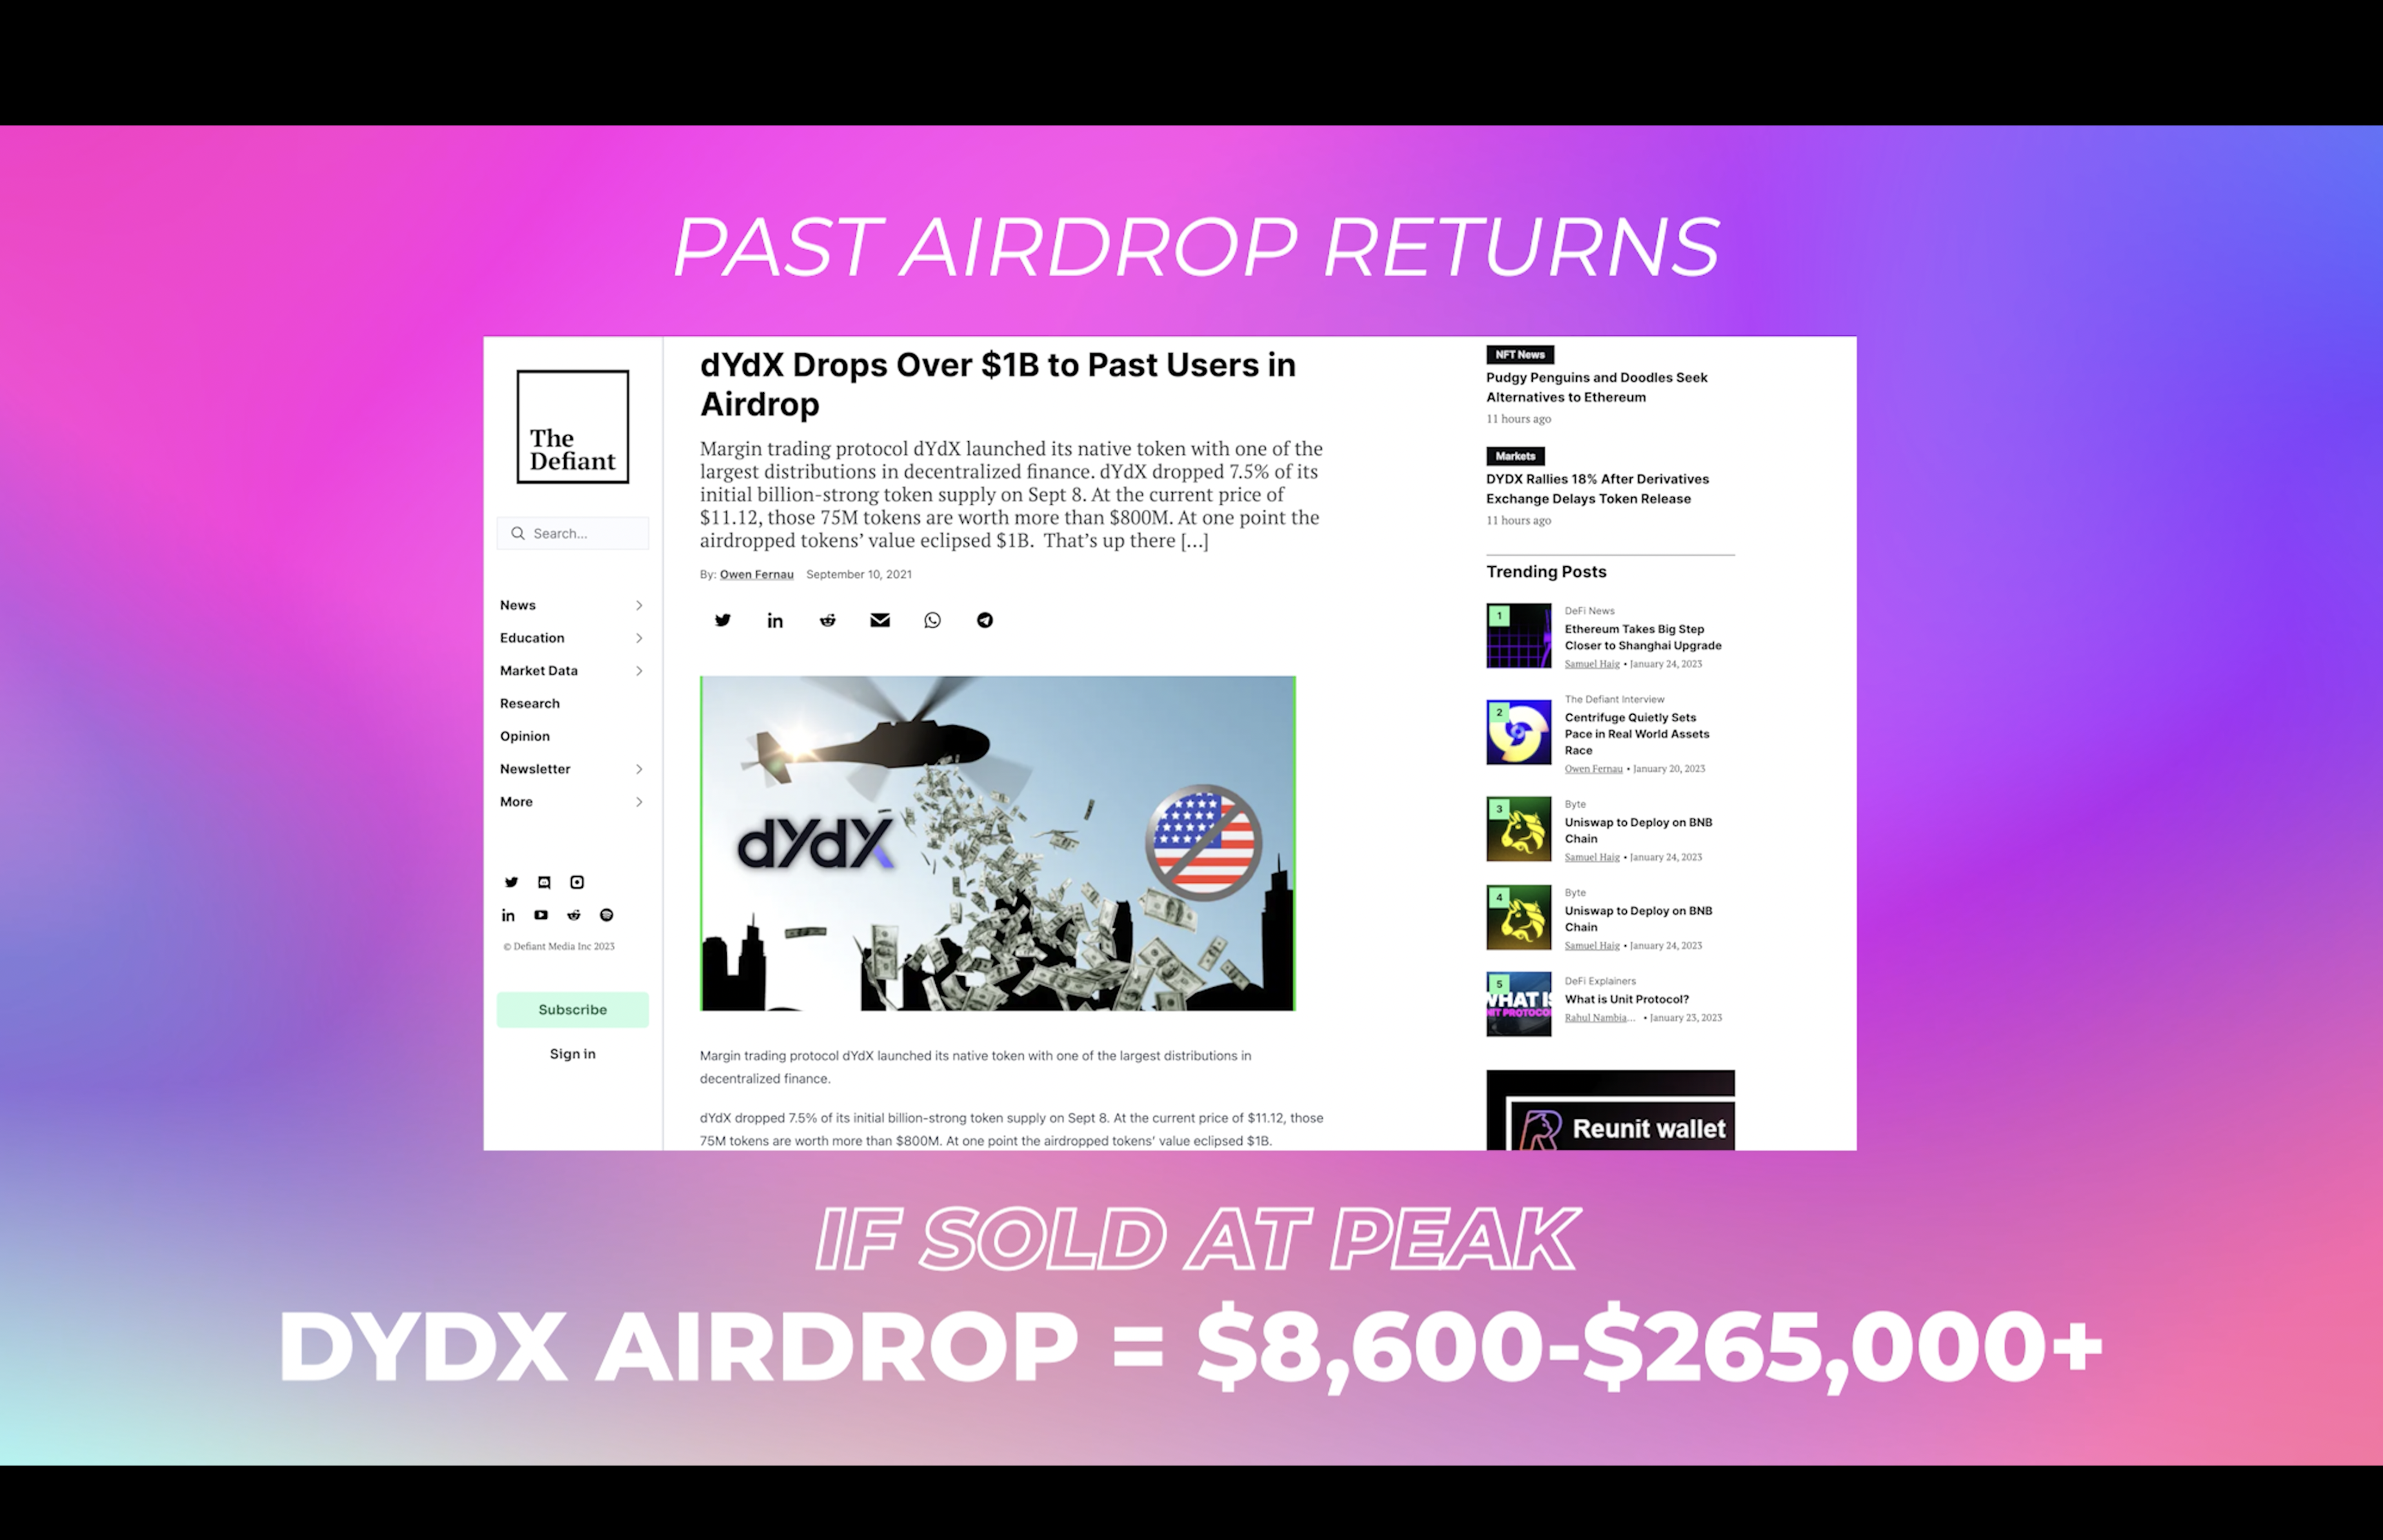 The dYdX airdrop was one of the biggest in history